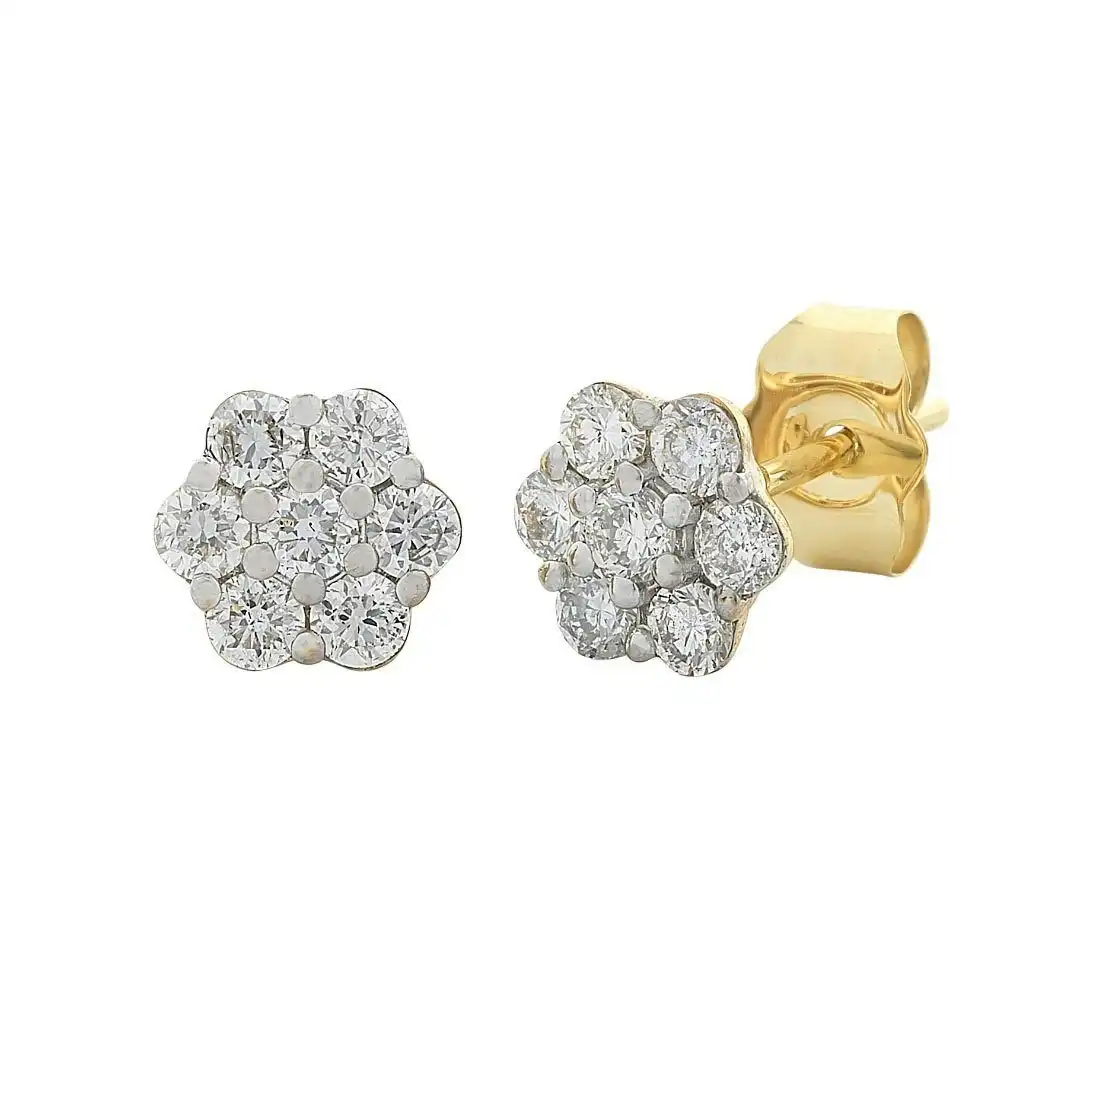 Meera Flower Earrings with 1/2ct of Laboratory Grown Diamonds in 9ct Yellow Gold